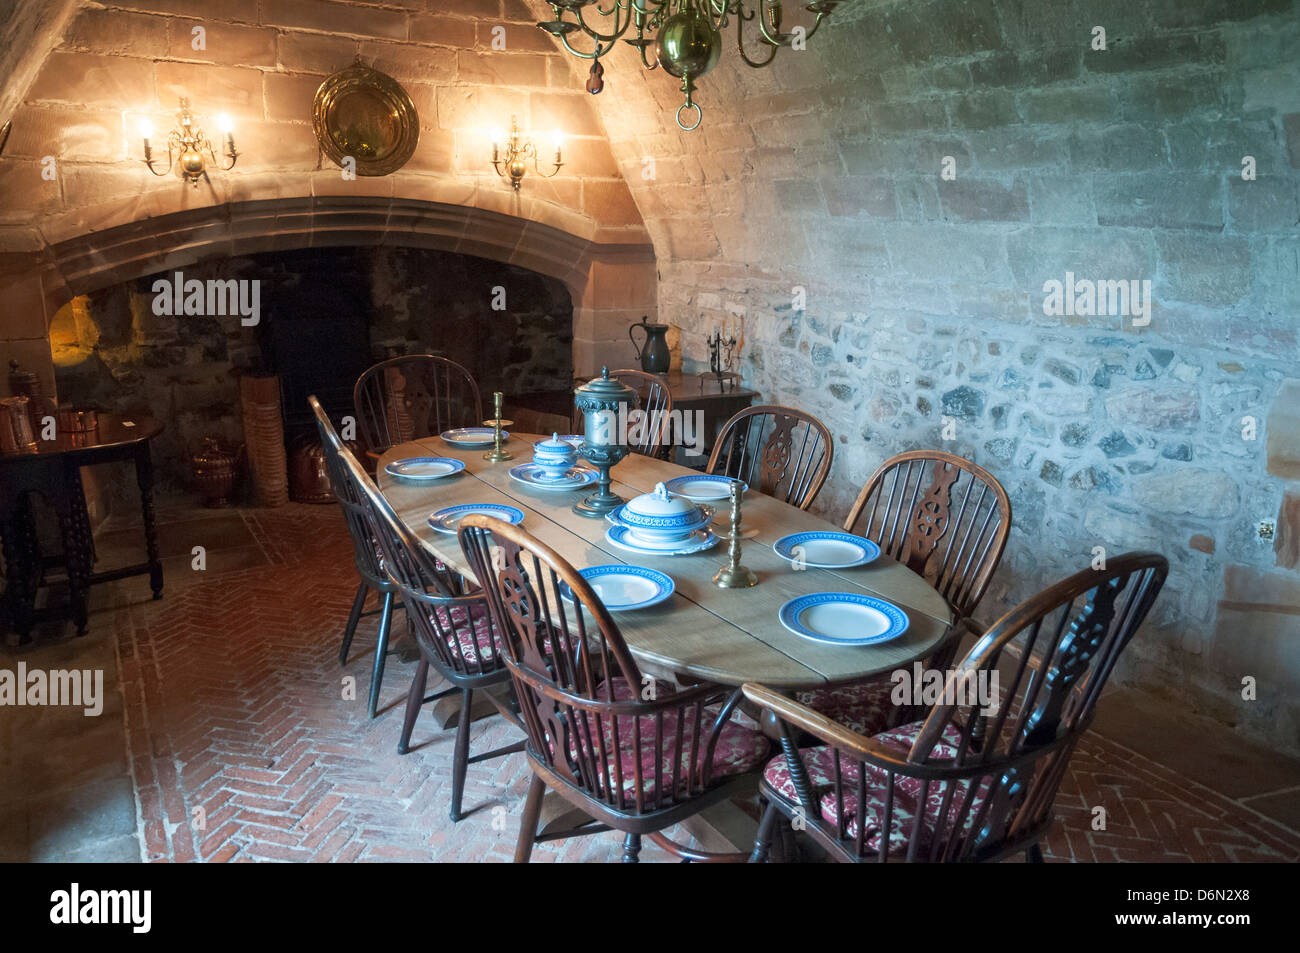 Great Britain, Holy Island, Lindisfarne Castle, interior dining room Stock Photo